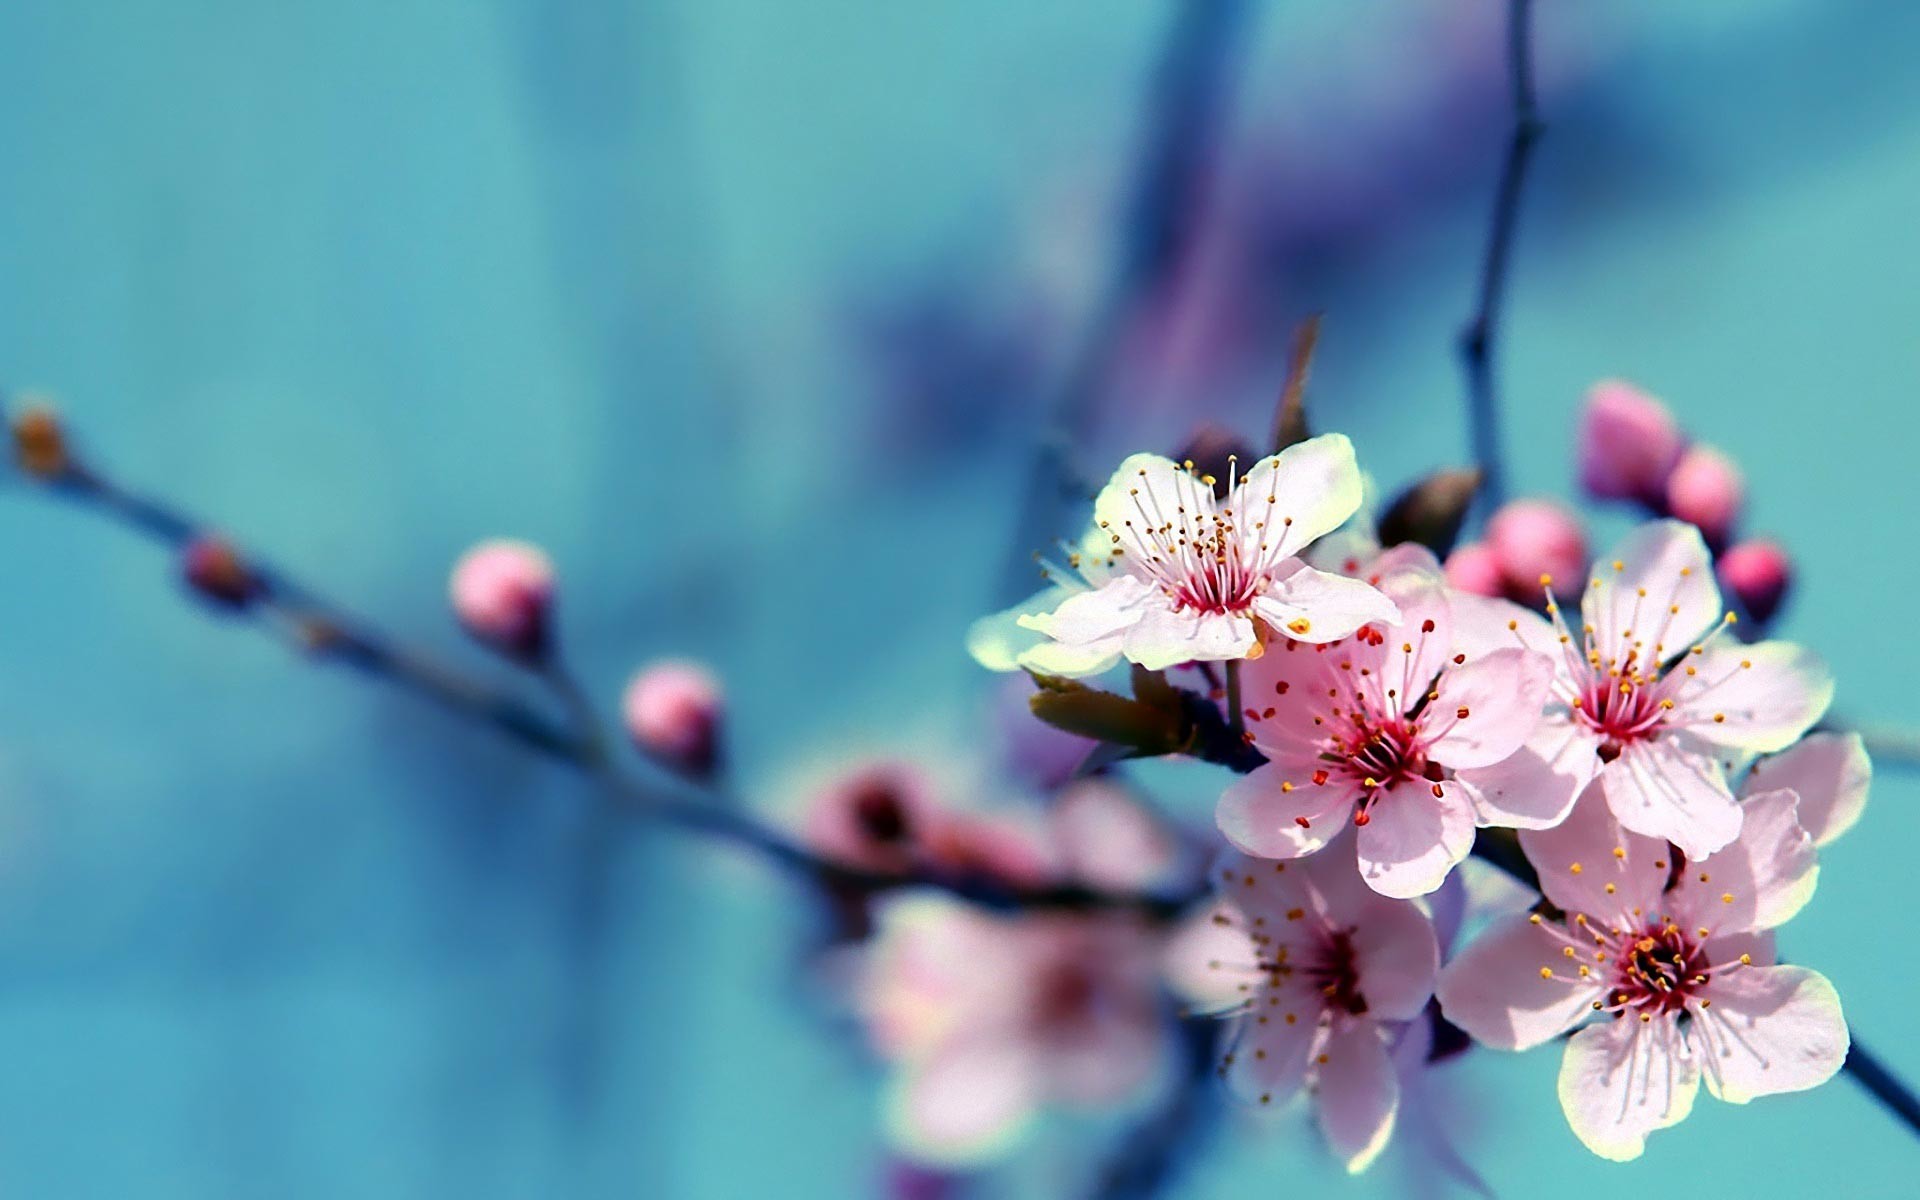 40 BEAUTIFUL FLOWER WALLPAPERS FREE TO DOWNLOAD